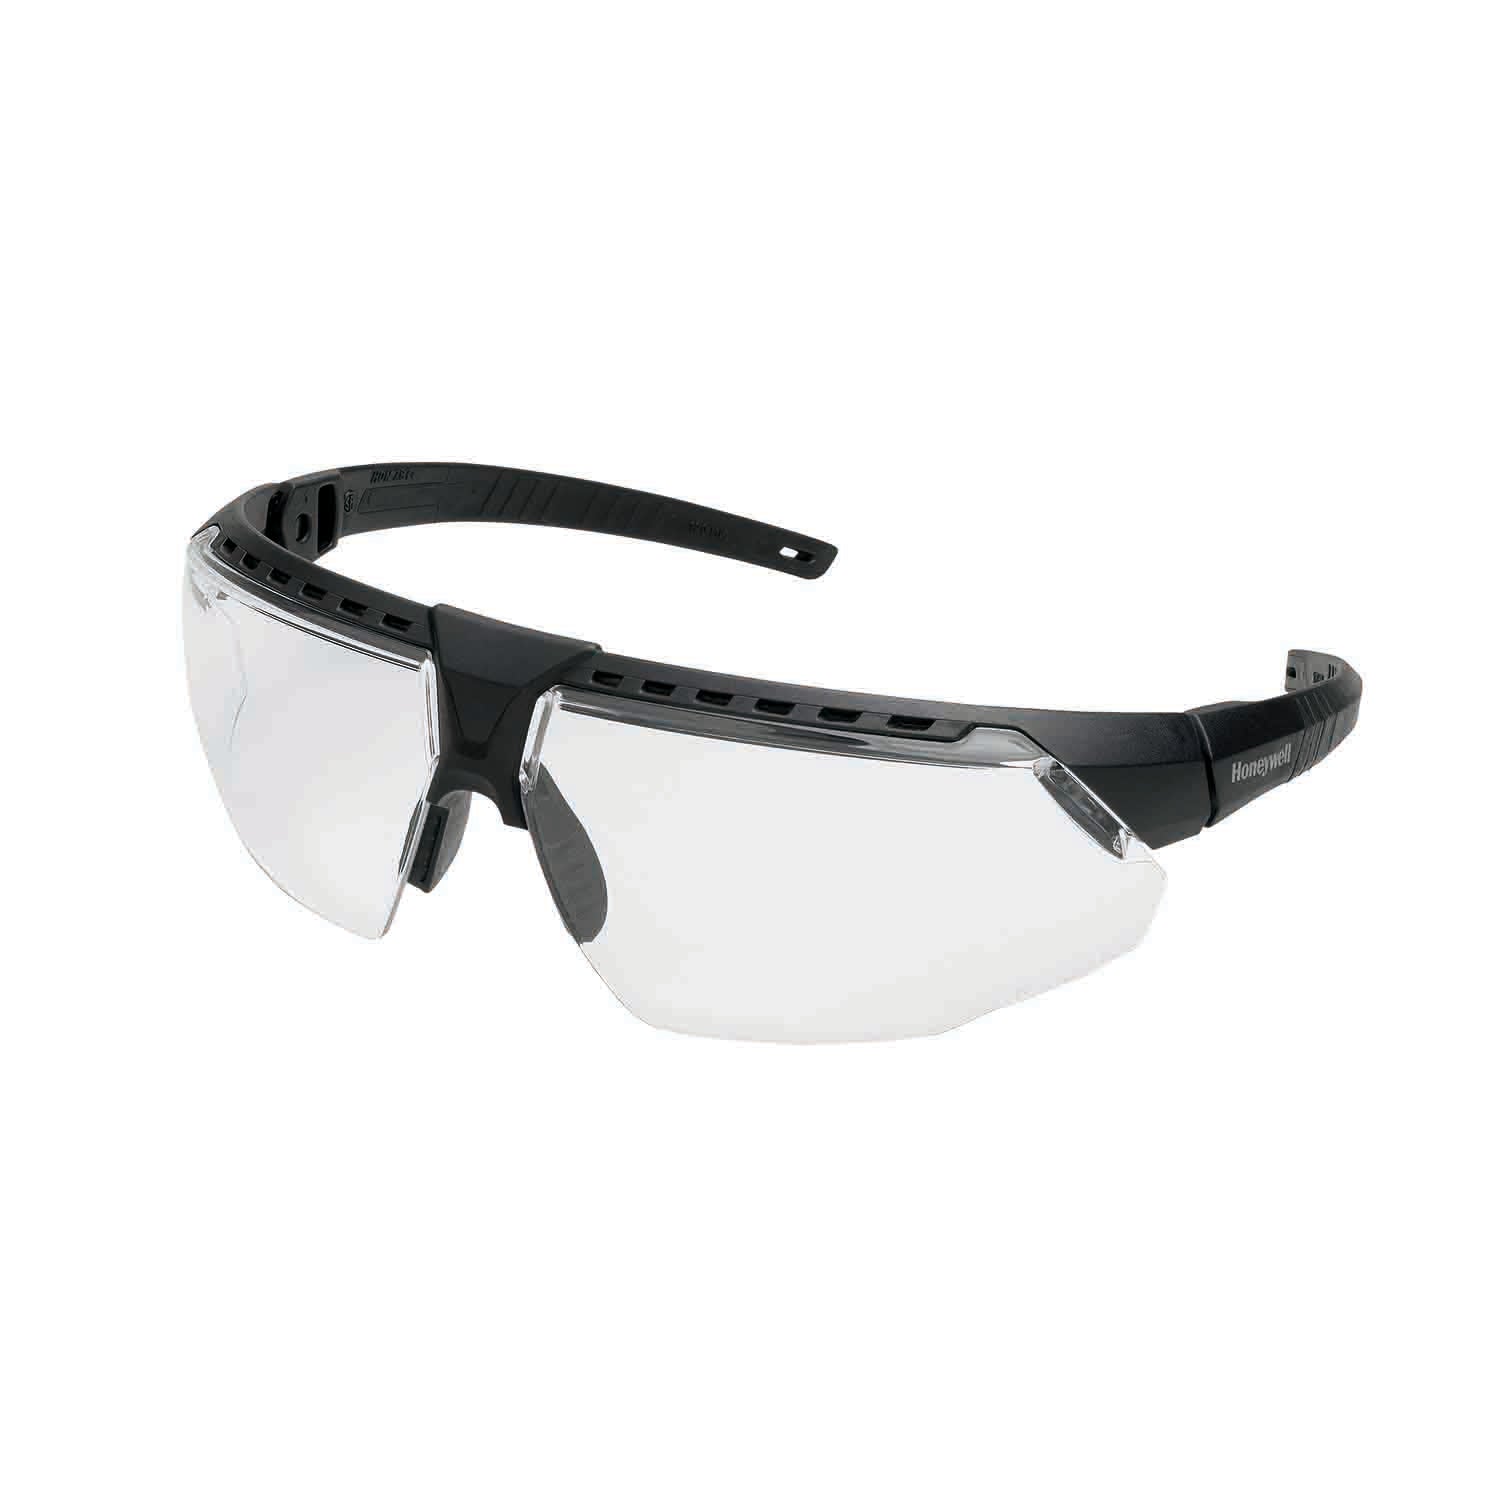 Honeywell AVATAR OTG Safety Goggles Fit over Prescription Spectacles  Glasses